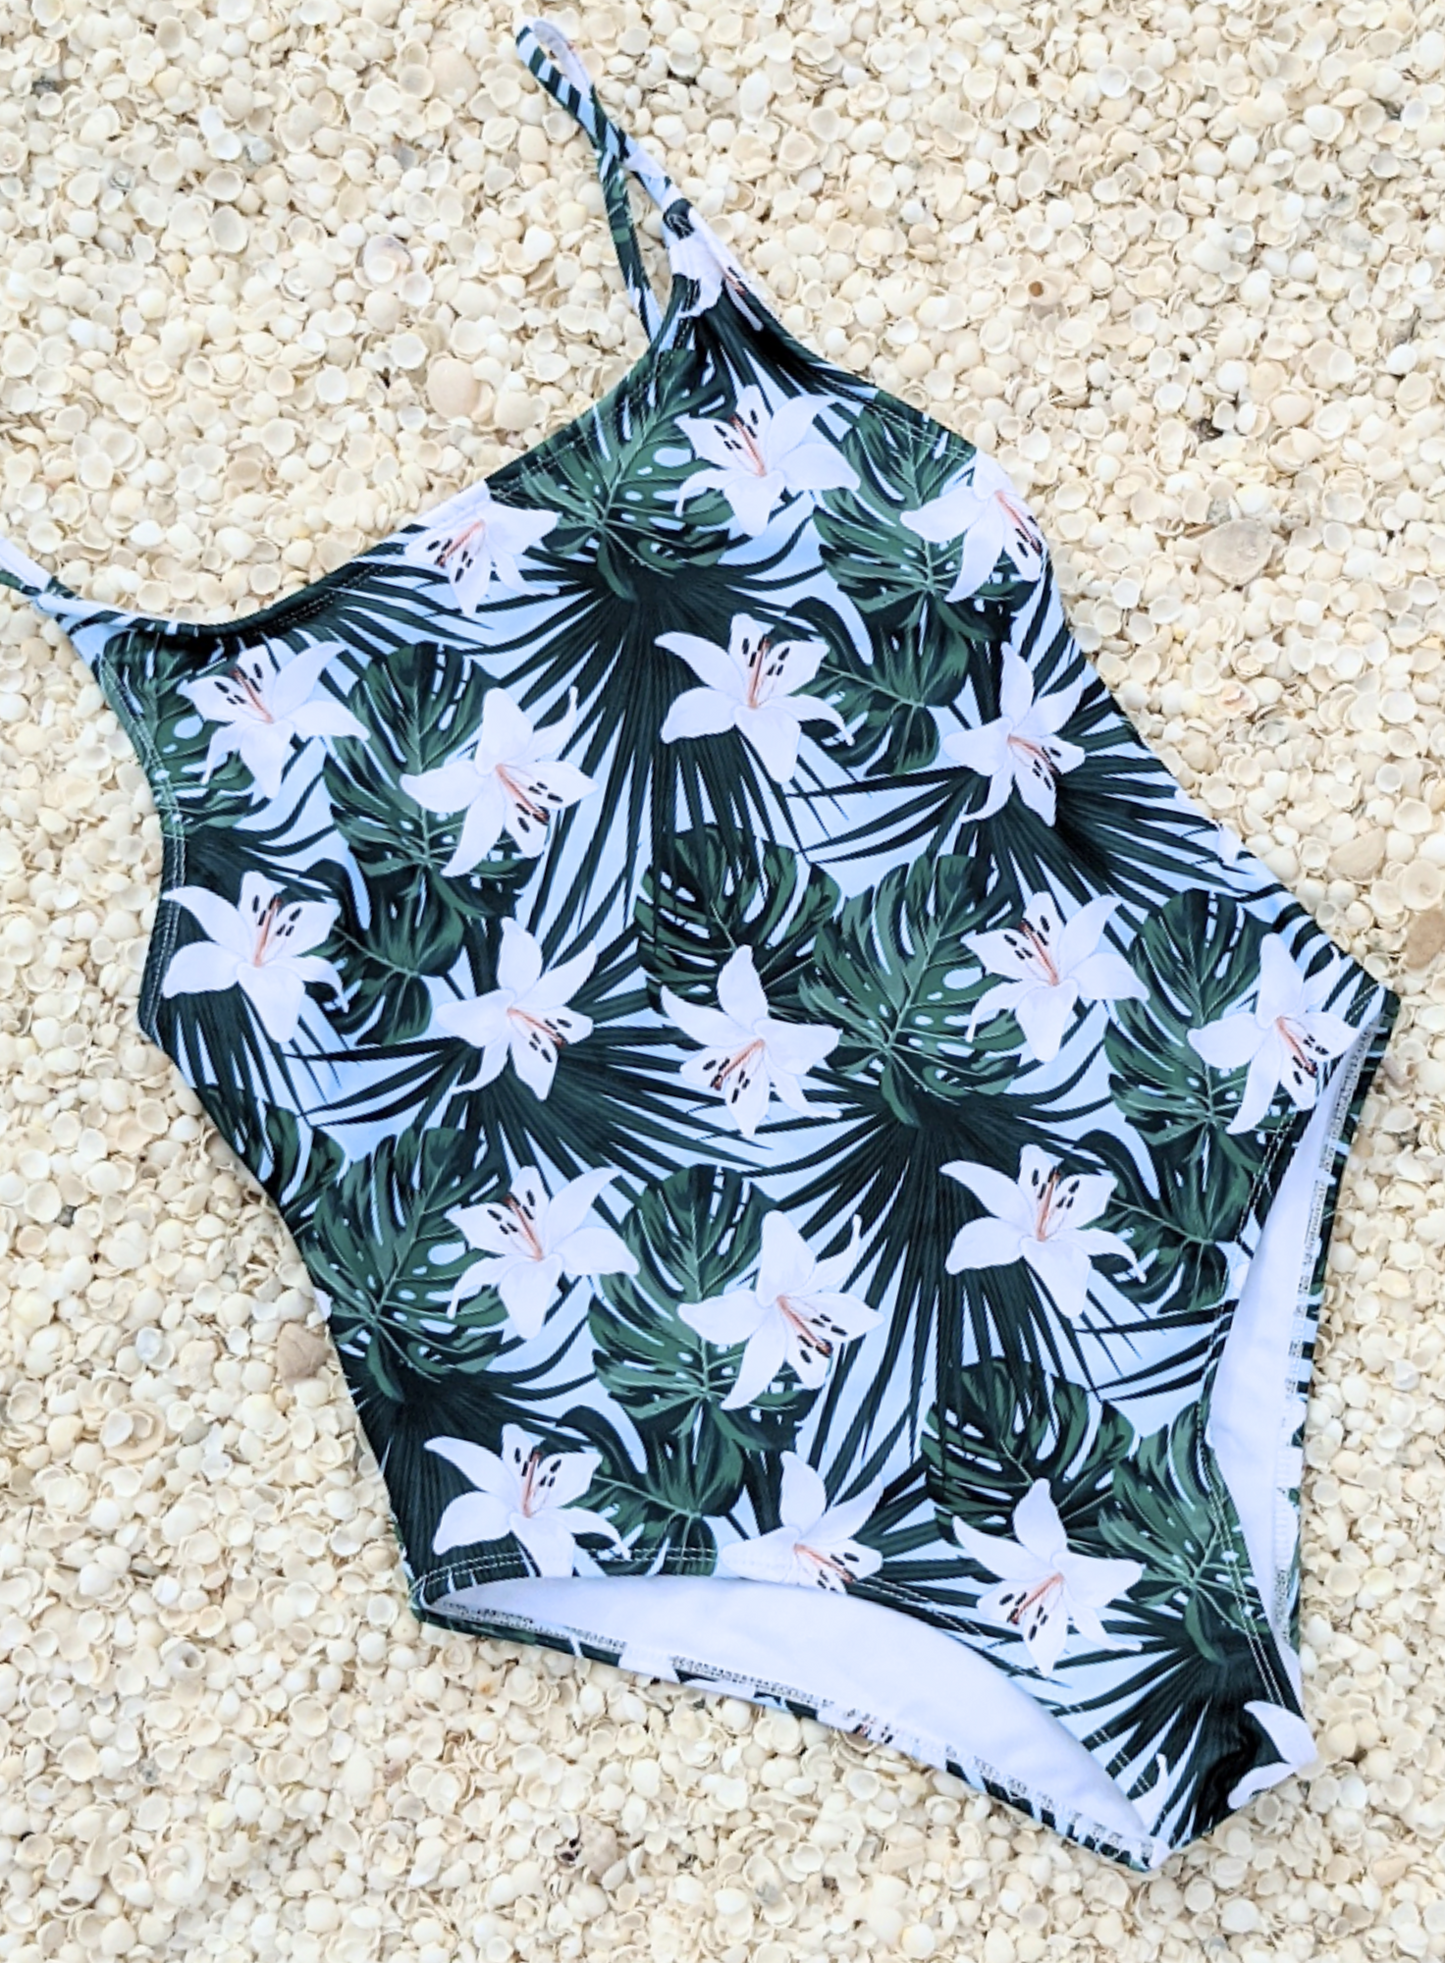 Sustainable One Piece Swimsuit with a Blue Floral Print, Thin Straps Classic Cut And High Cut Leg